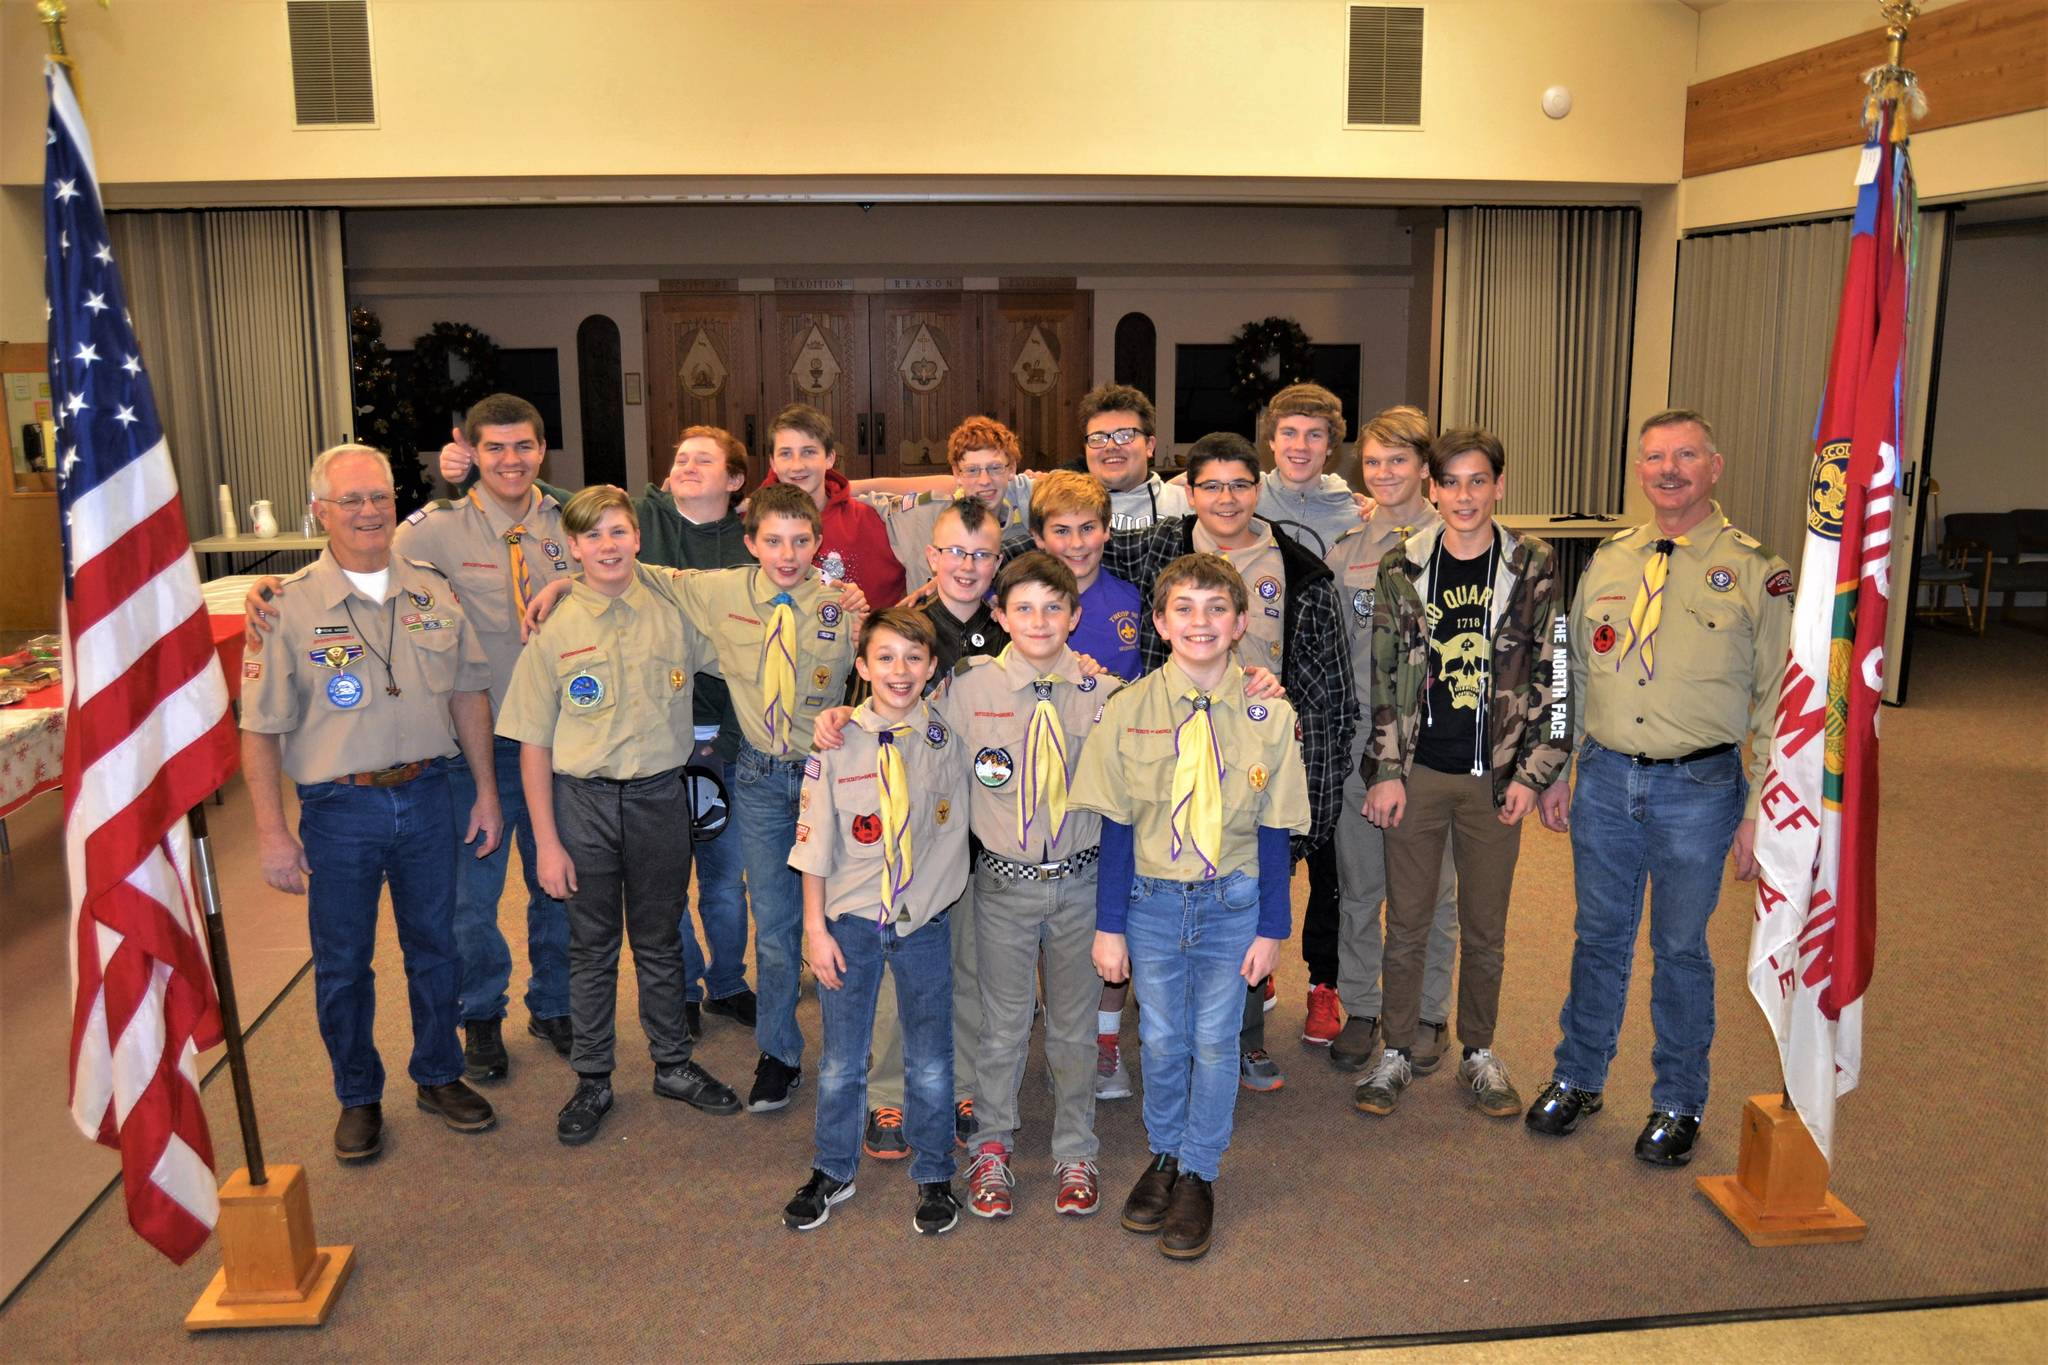 Members of Boy Scout Troop 90 in Sequim along with Scoutmaster Rene Nadon, left, and Assistant Scoutmaster Ken Smith, right, say they appreciate the support community members provided after about $9000 in camping equipment was stolen from their trailer. “The community has been phenomenal,” Nadon said. Sequim Gazette photo by Matthew Nash